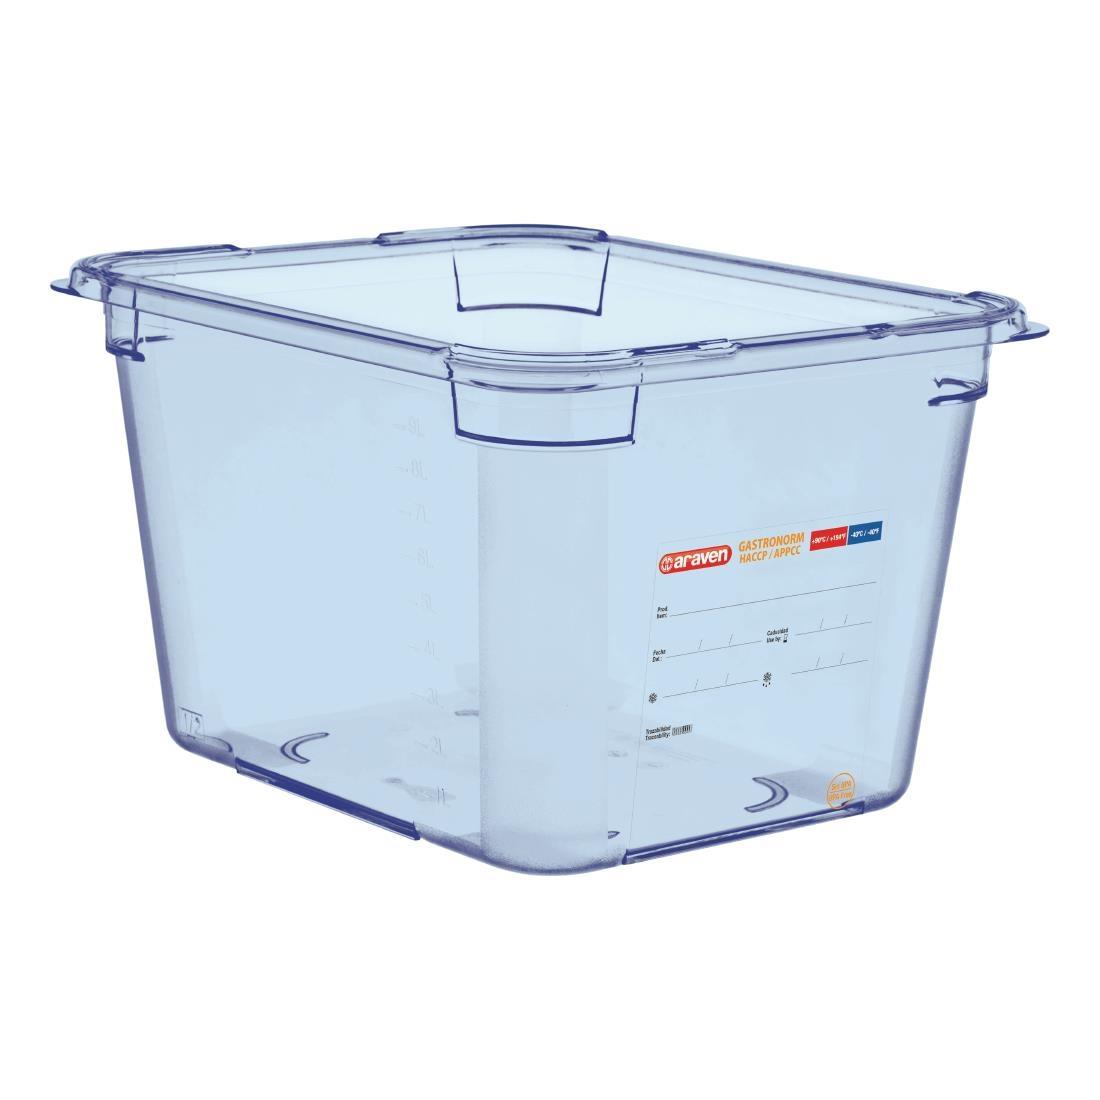 Araven ABS Food Storage Container Blue GN 1/2 200mm - GP586  - 1